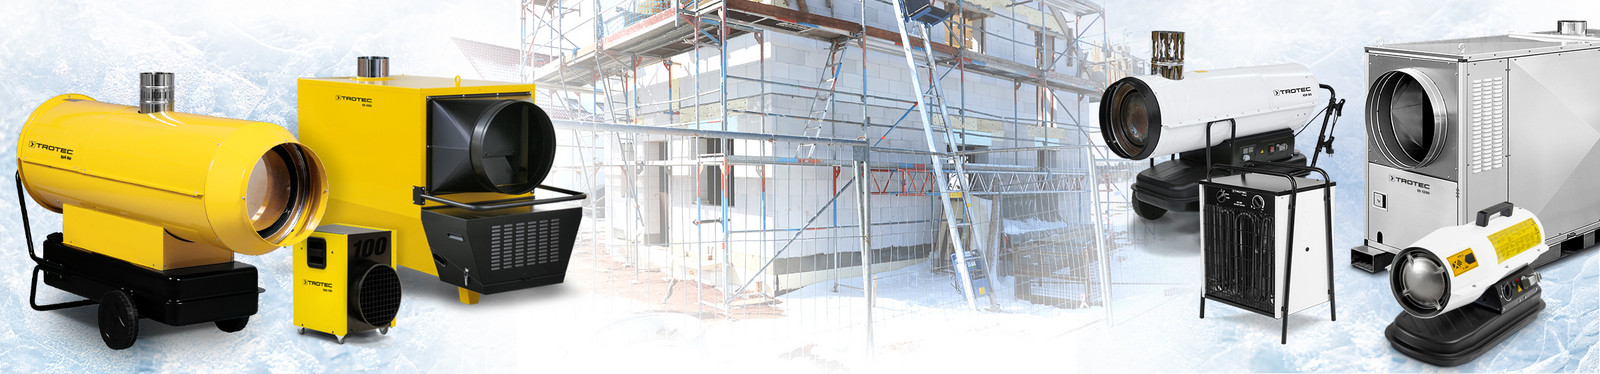 Construction site heating solutions